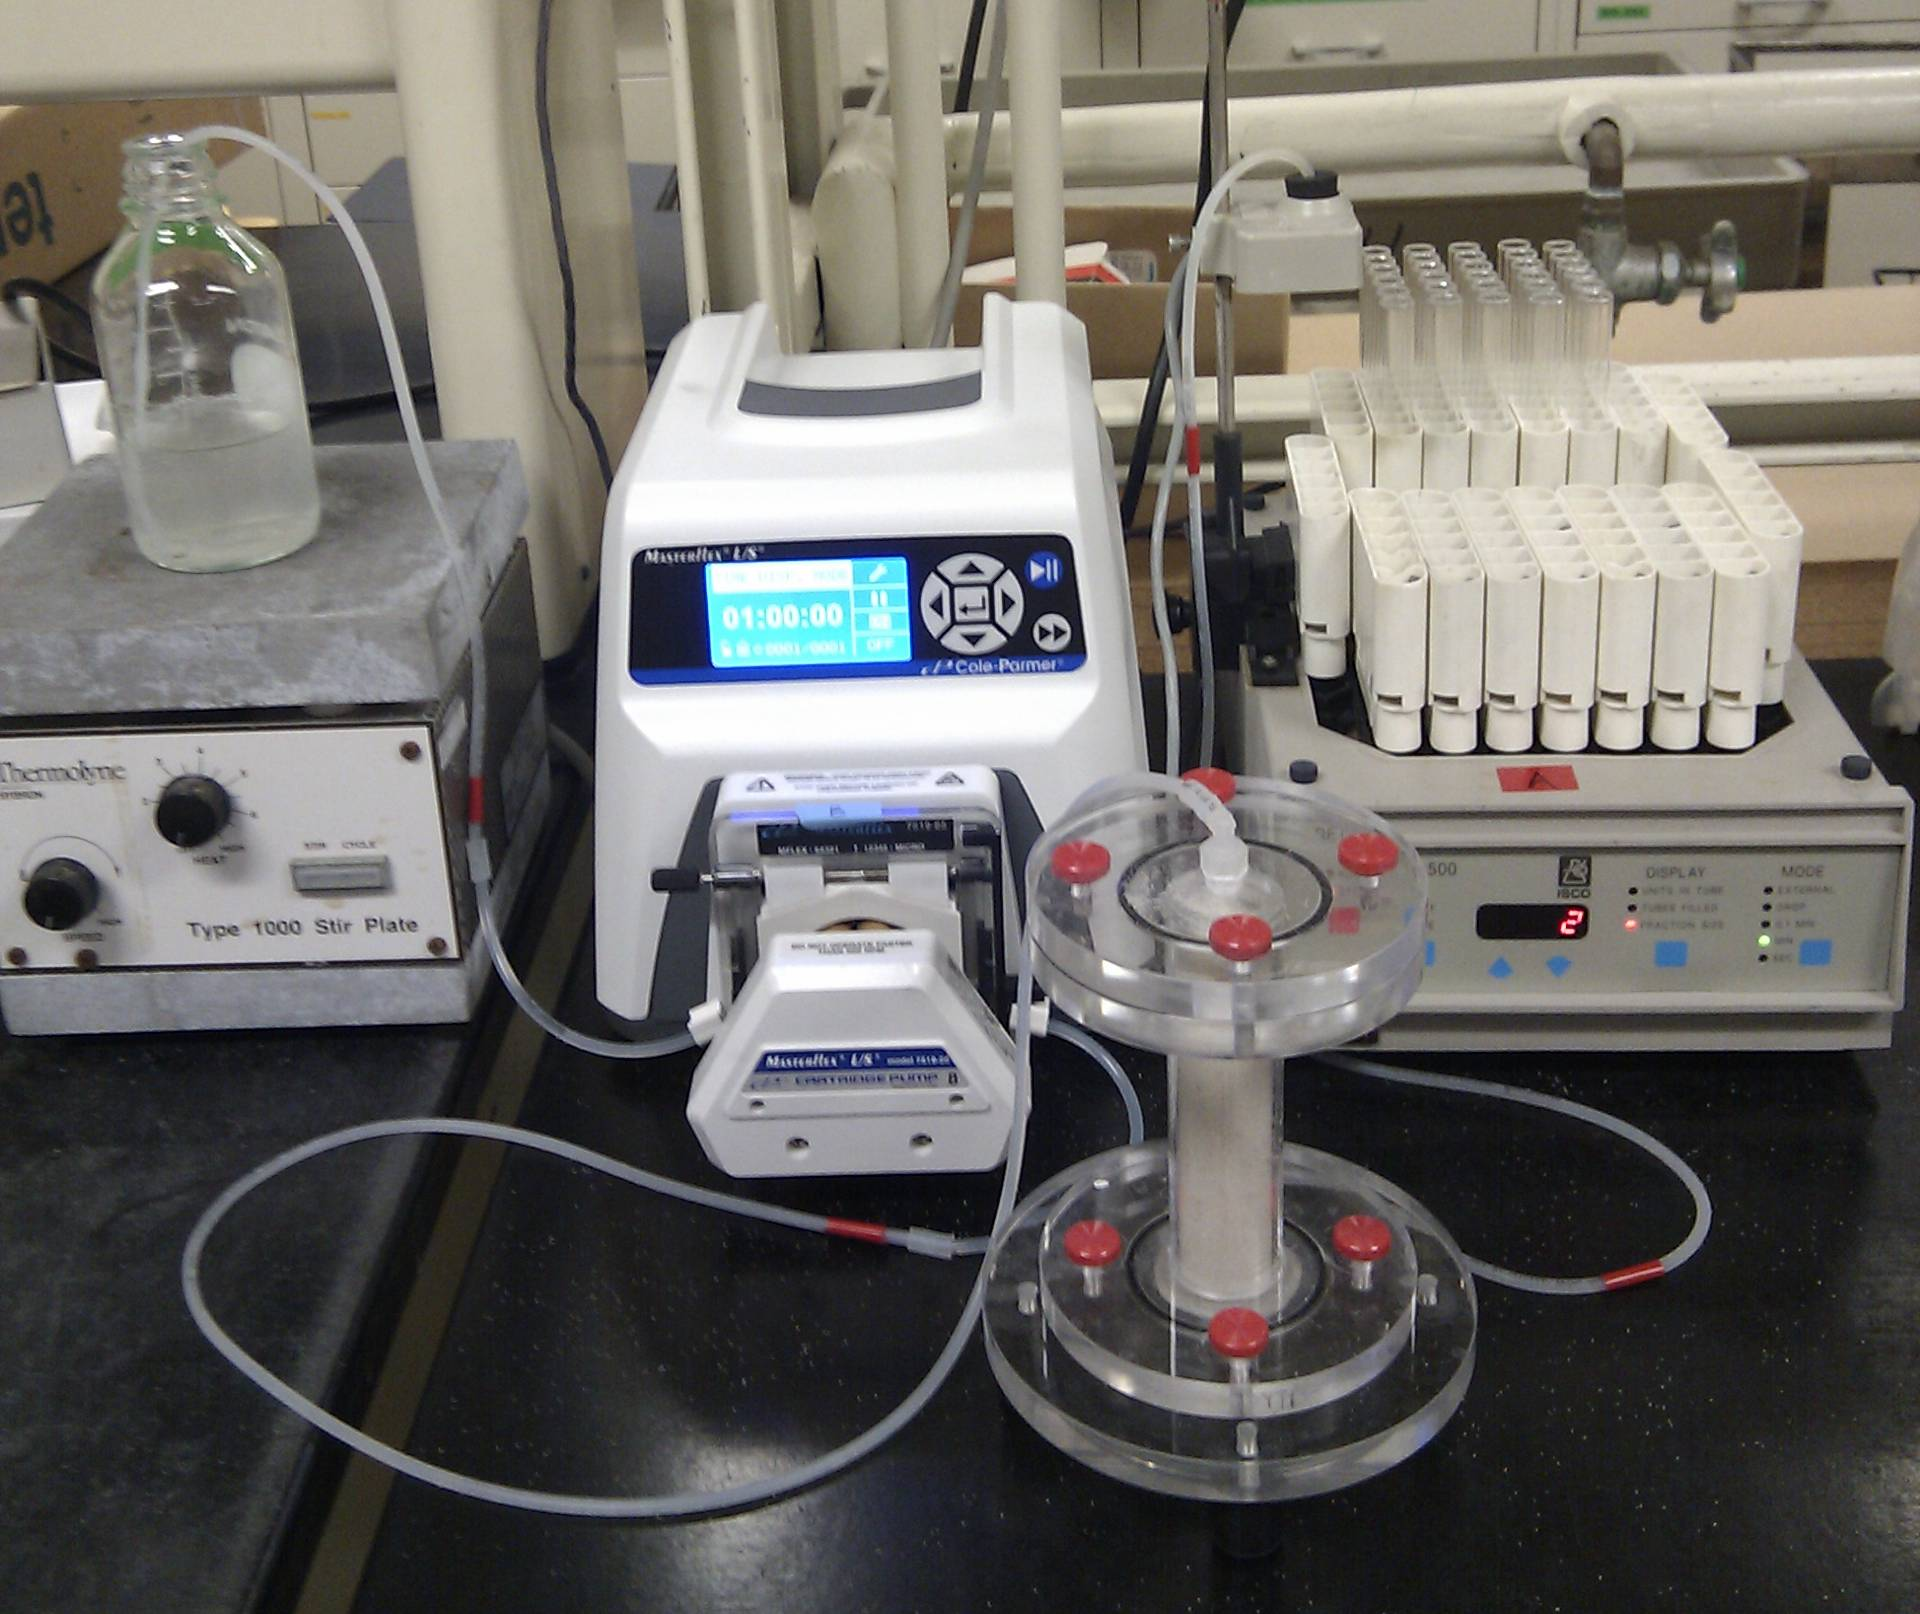 Column setup for transport of colloids and nanoparticles